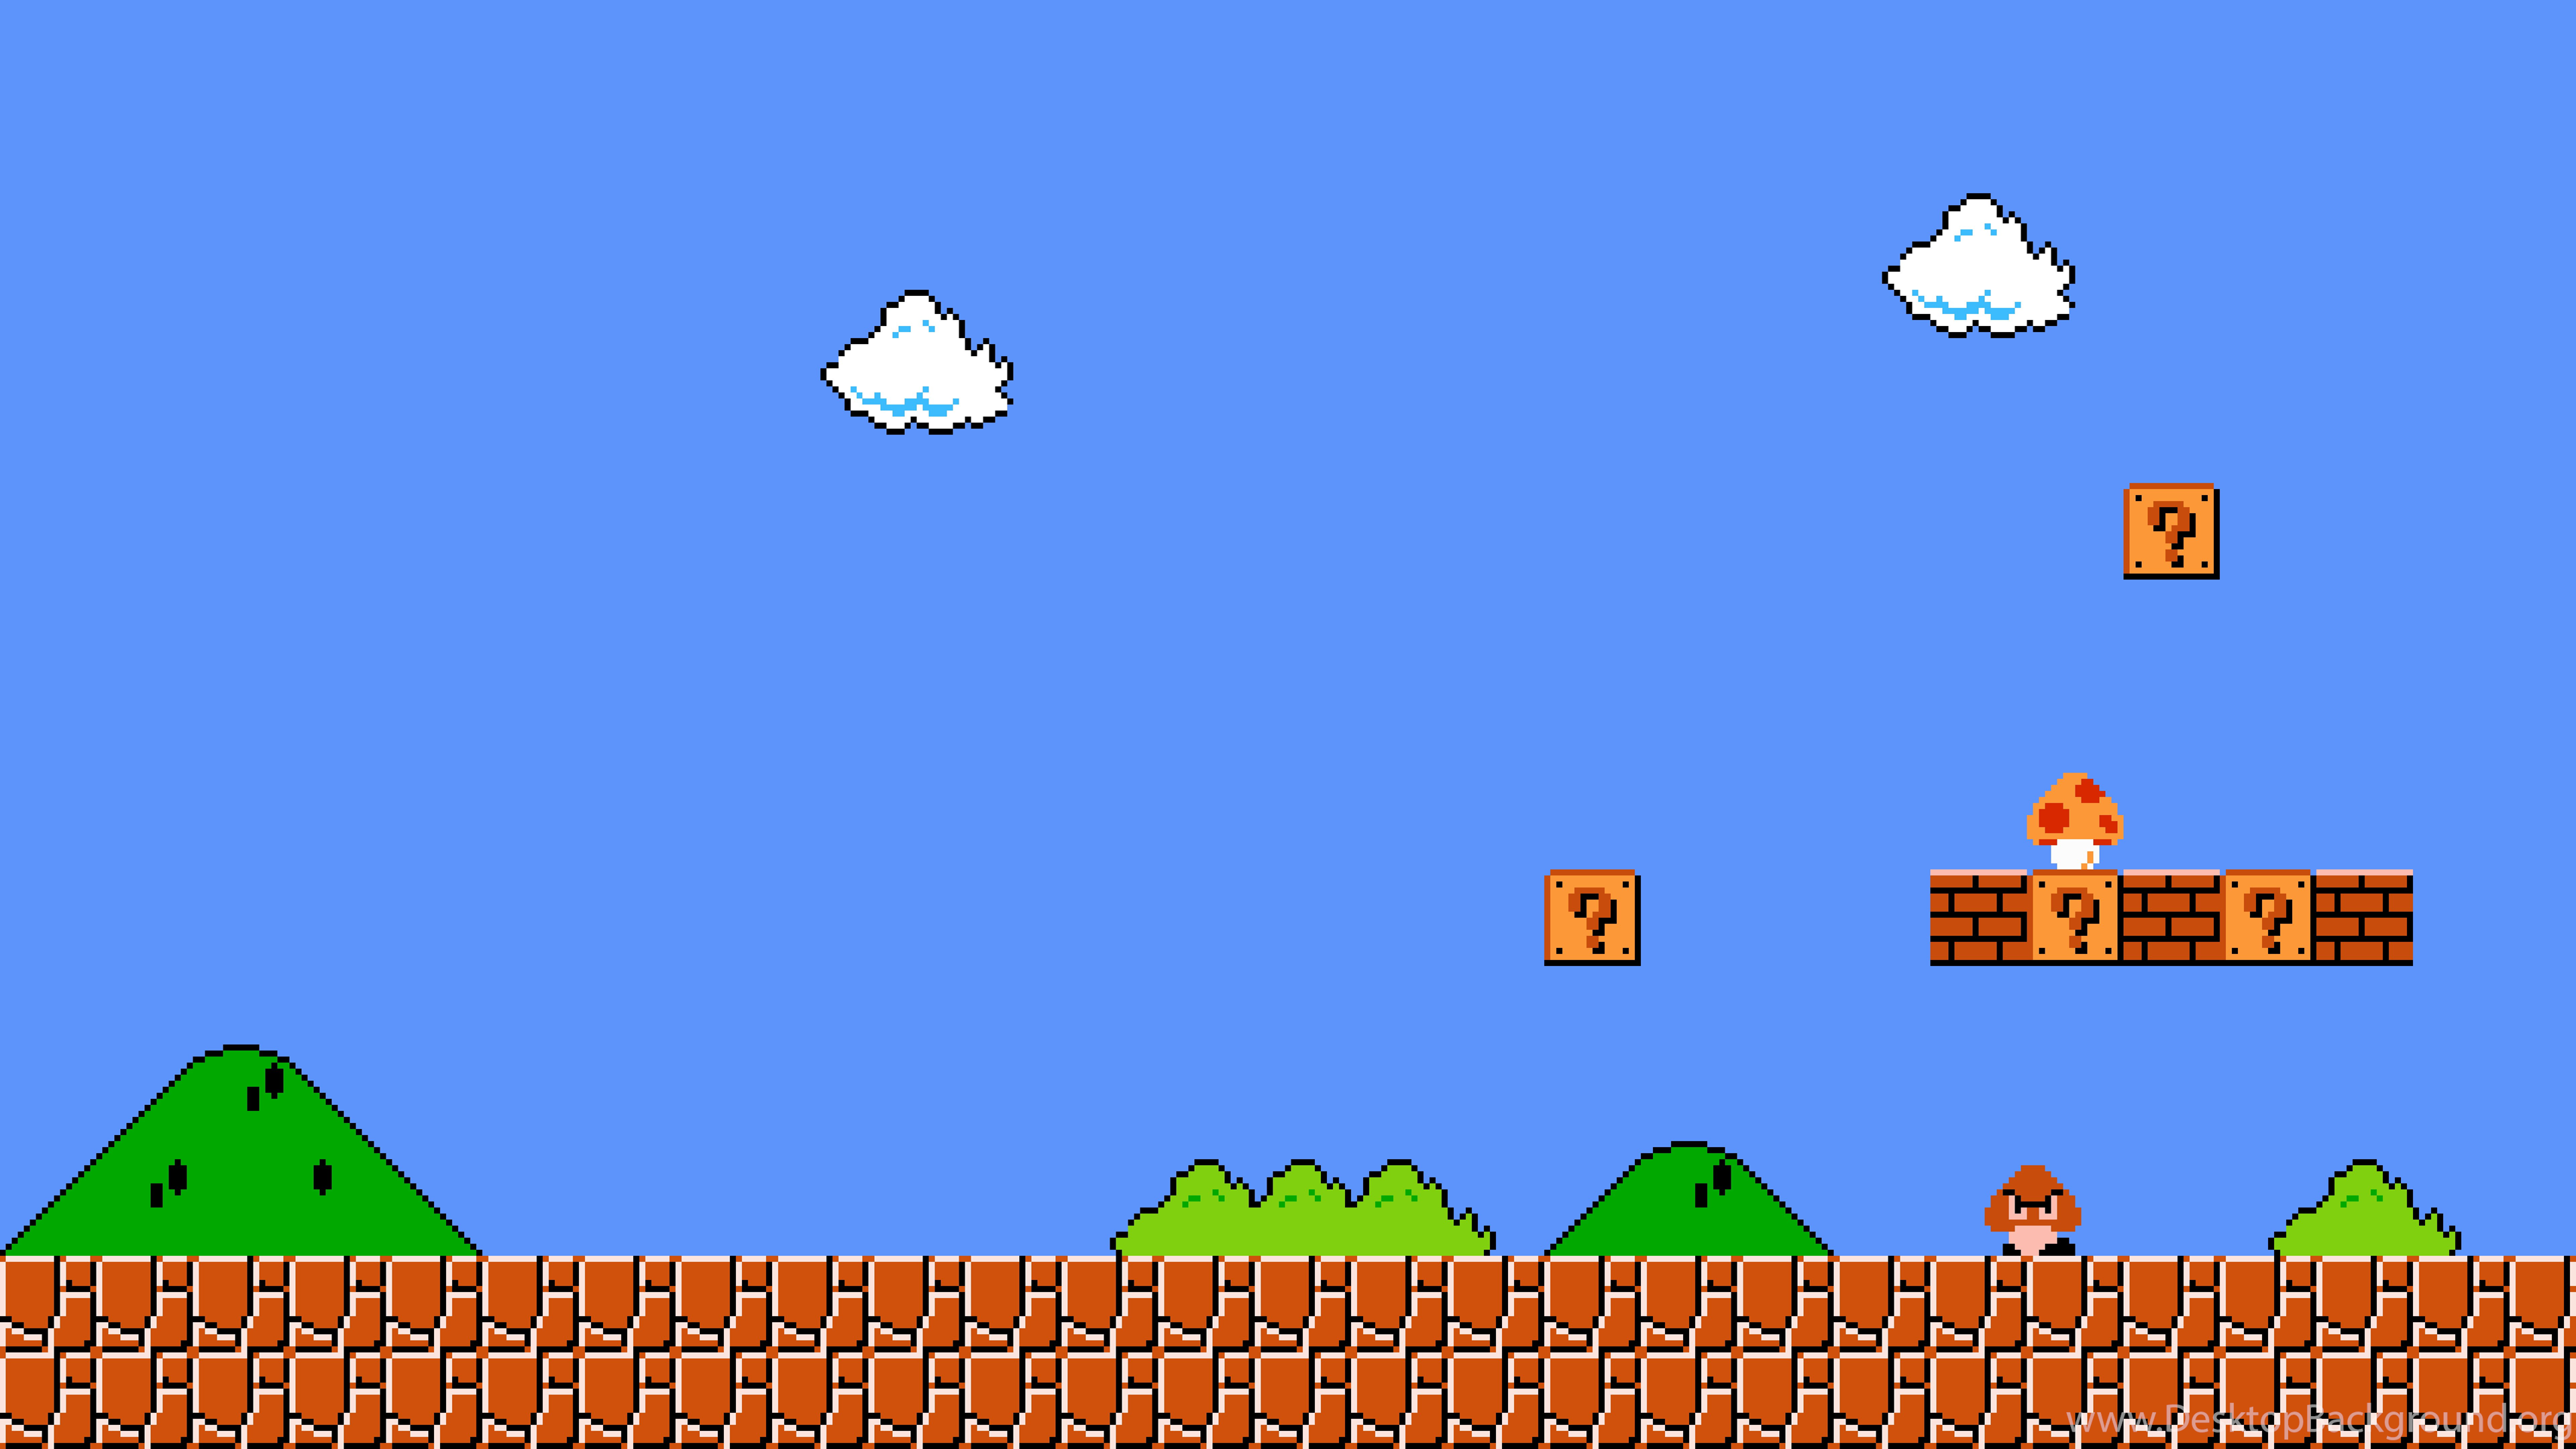 how to download and play super mario bros on pc